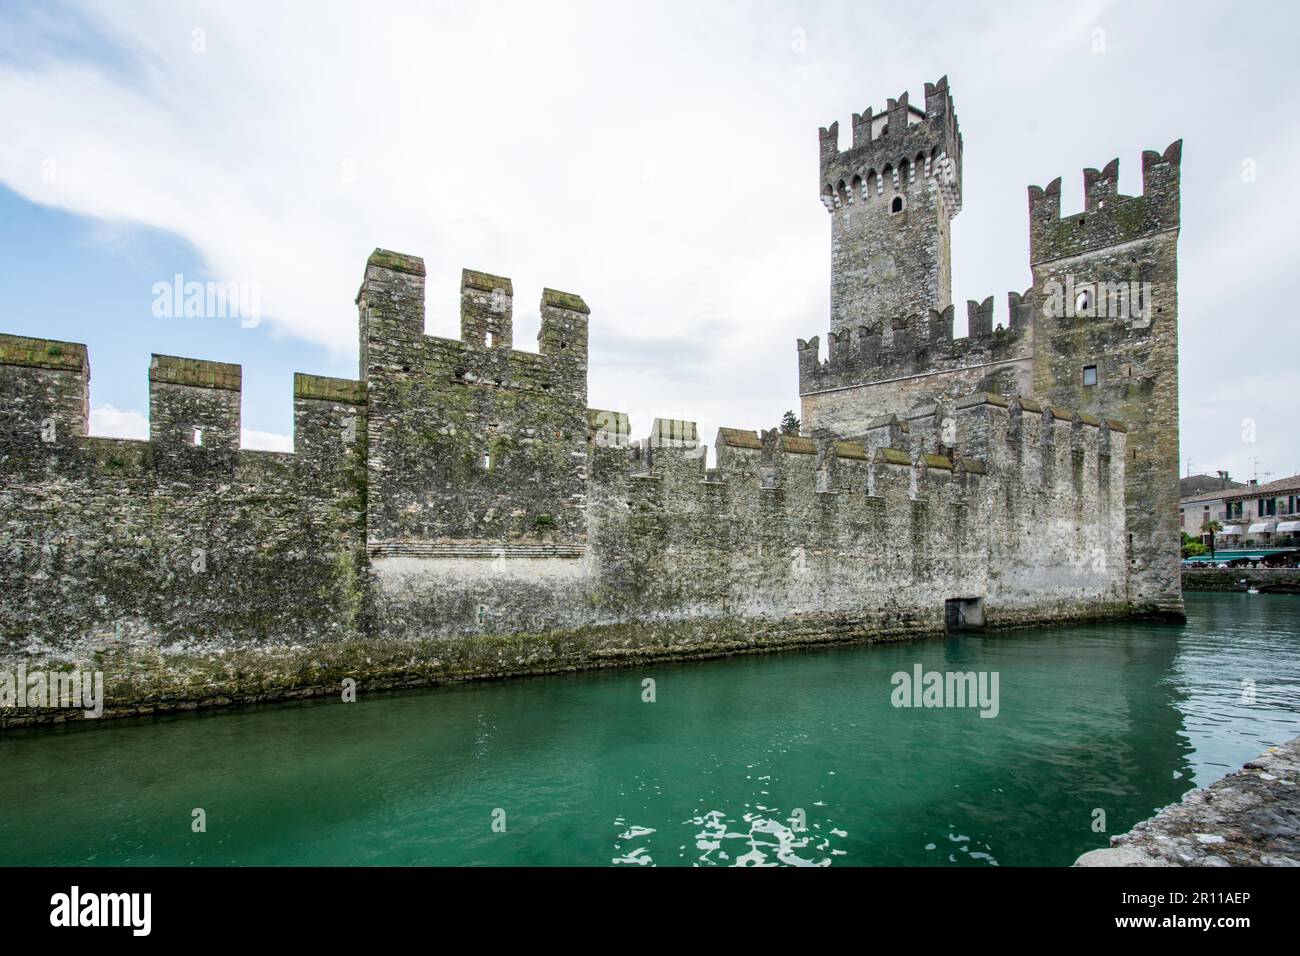 SIRMIONE, ITALY, APRIL 23: The Scaliger Caslte in Sirmione, Italy on April 23, 2014. The famous castle was built in the 13th century. Foto taken from Stock Photo